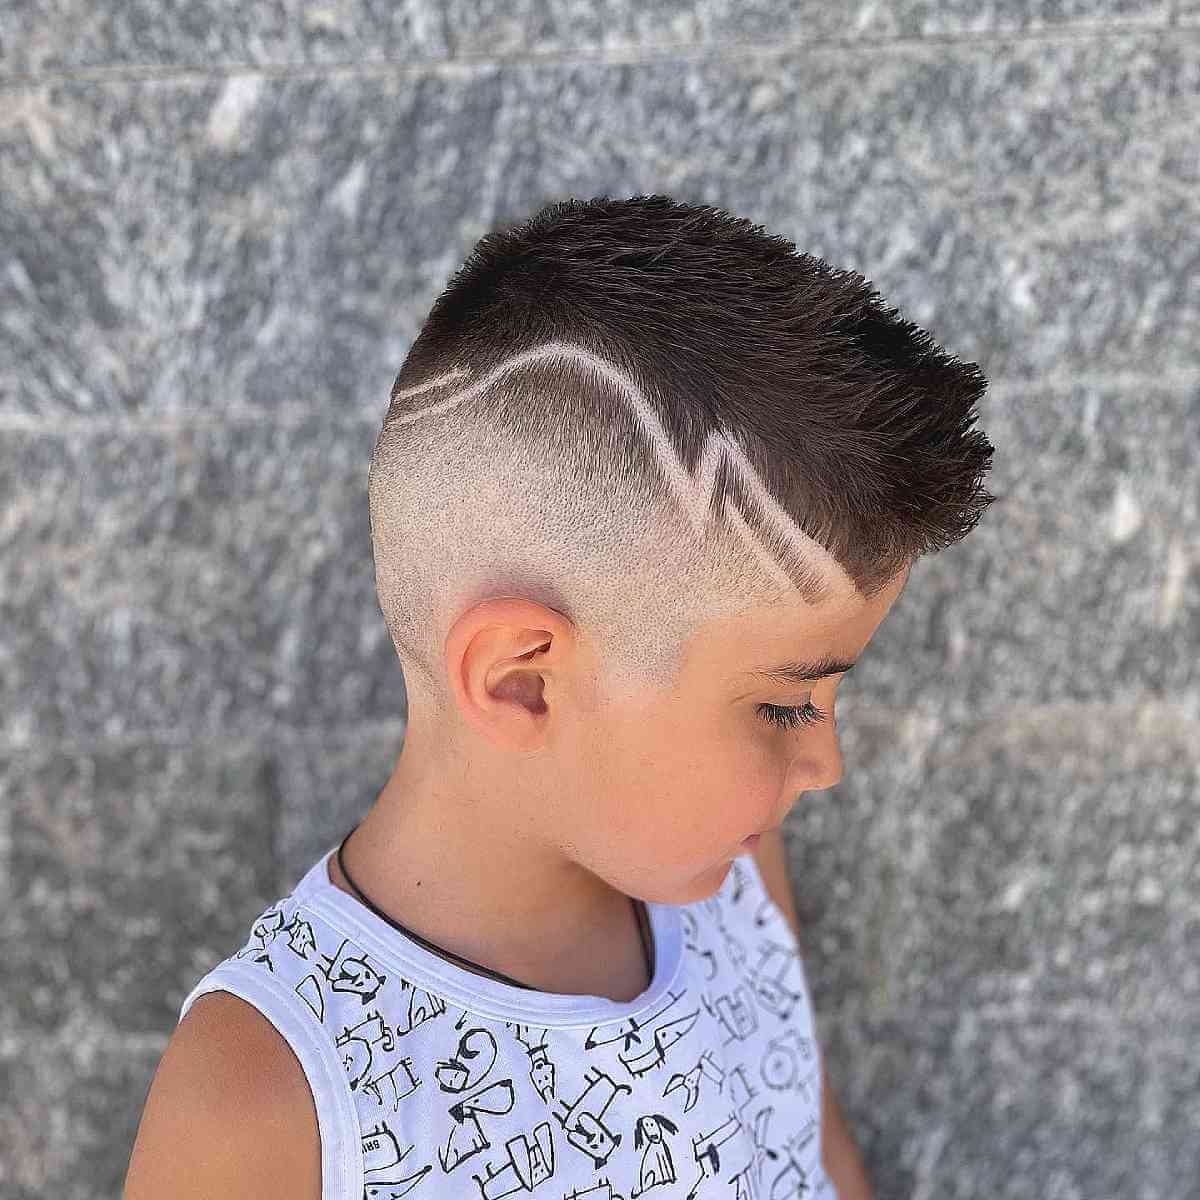 Kids Hairstyles | Childrens Hairstyles | Haircuts for Children and Teenagers